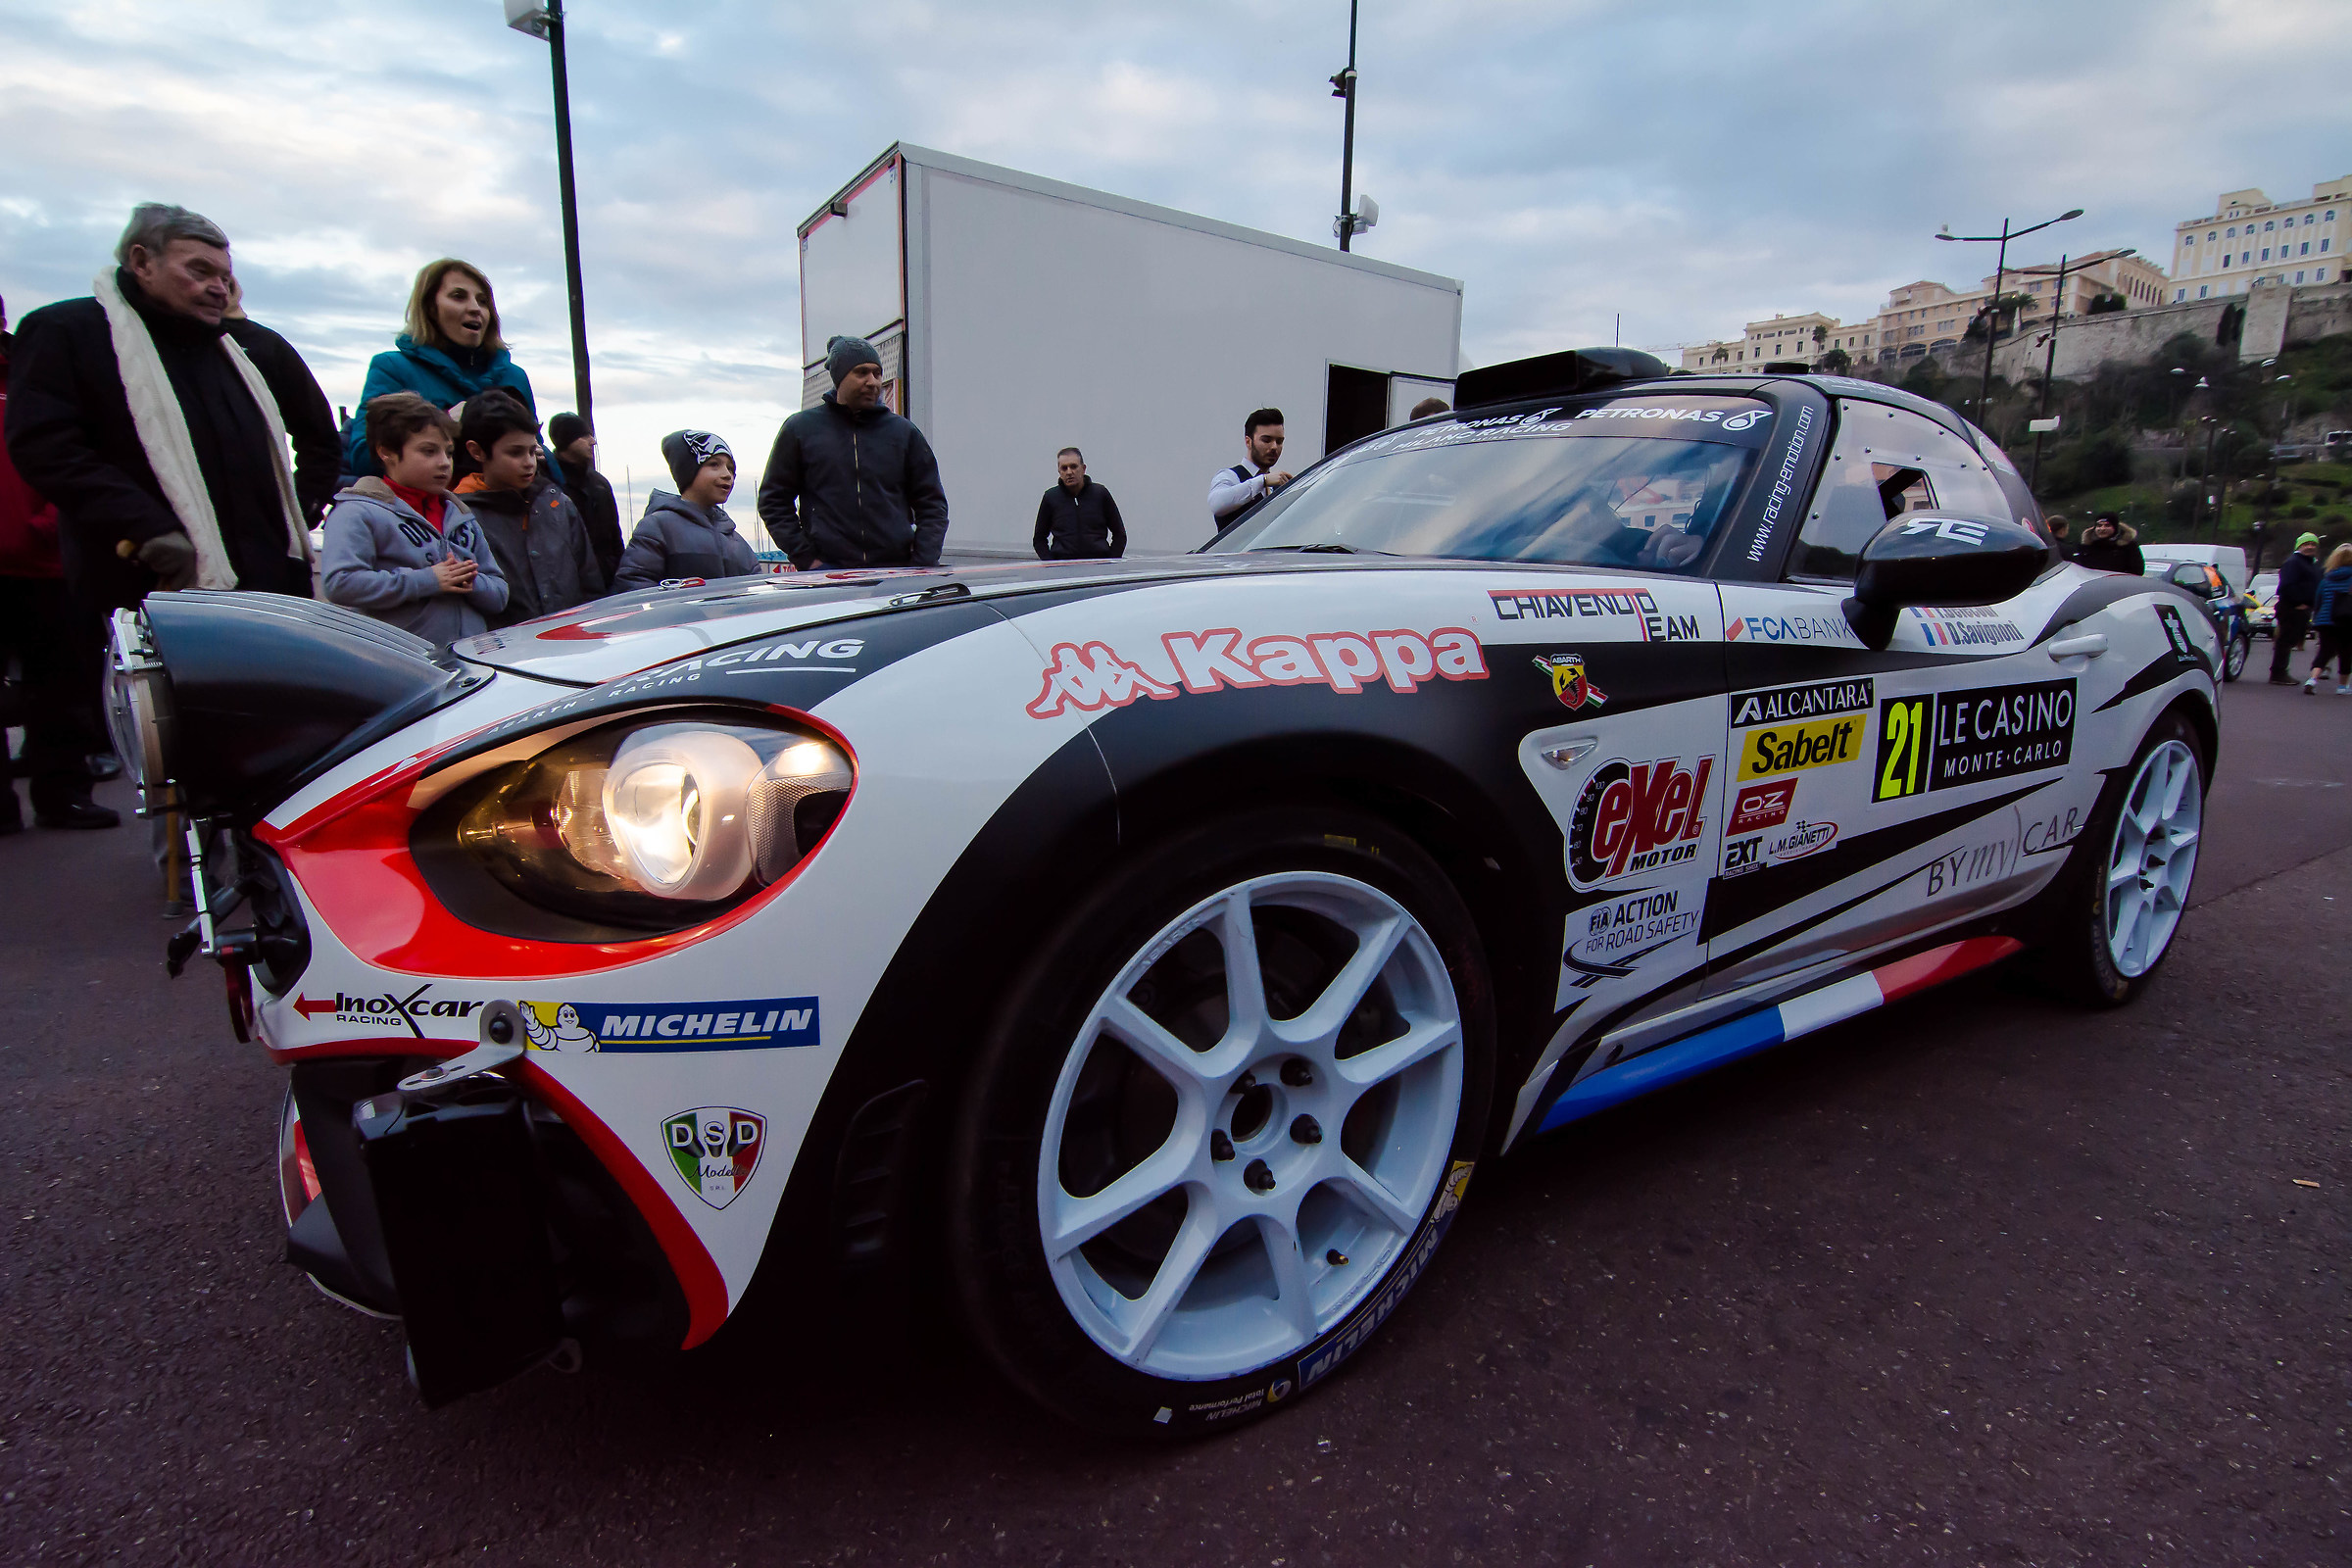 Fiat 124 Abarth at wrc montecarlo rally 2014...